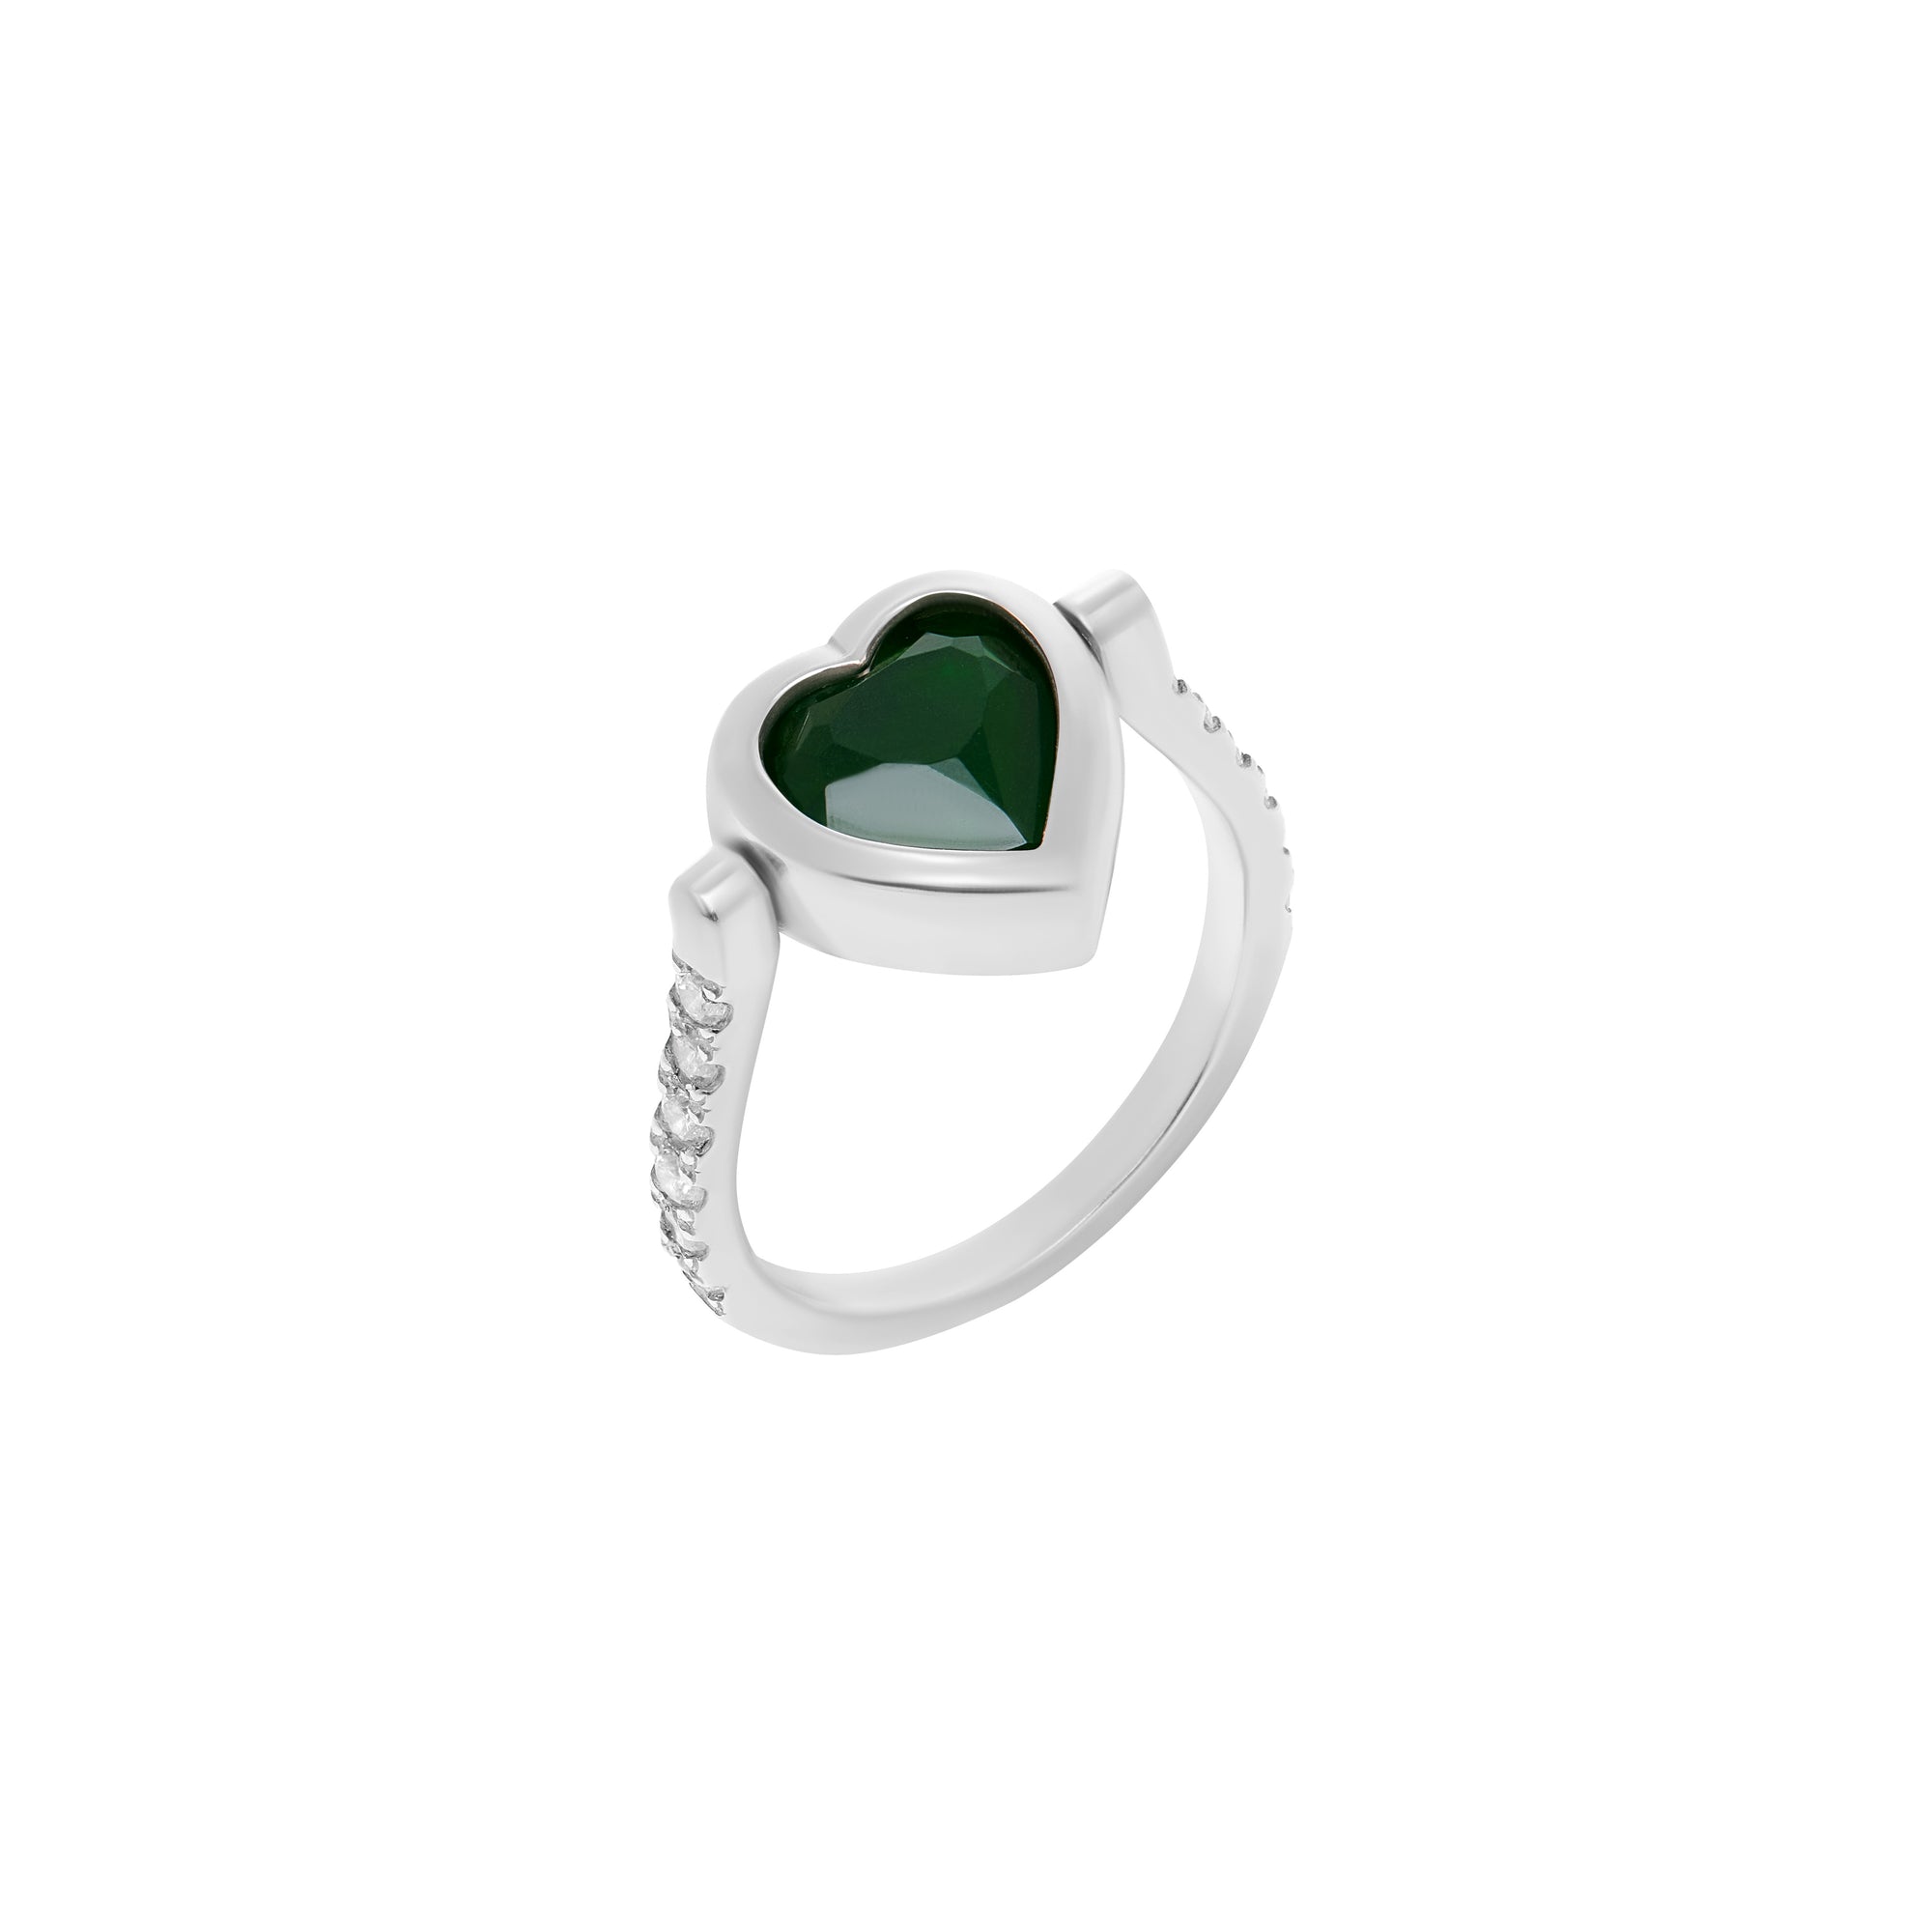 Ring 'Dark Green Eddy Heart' – Be Gentle With Yourself